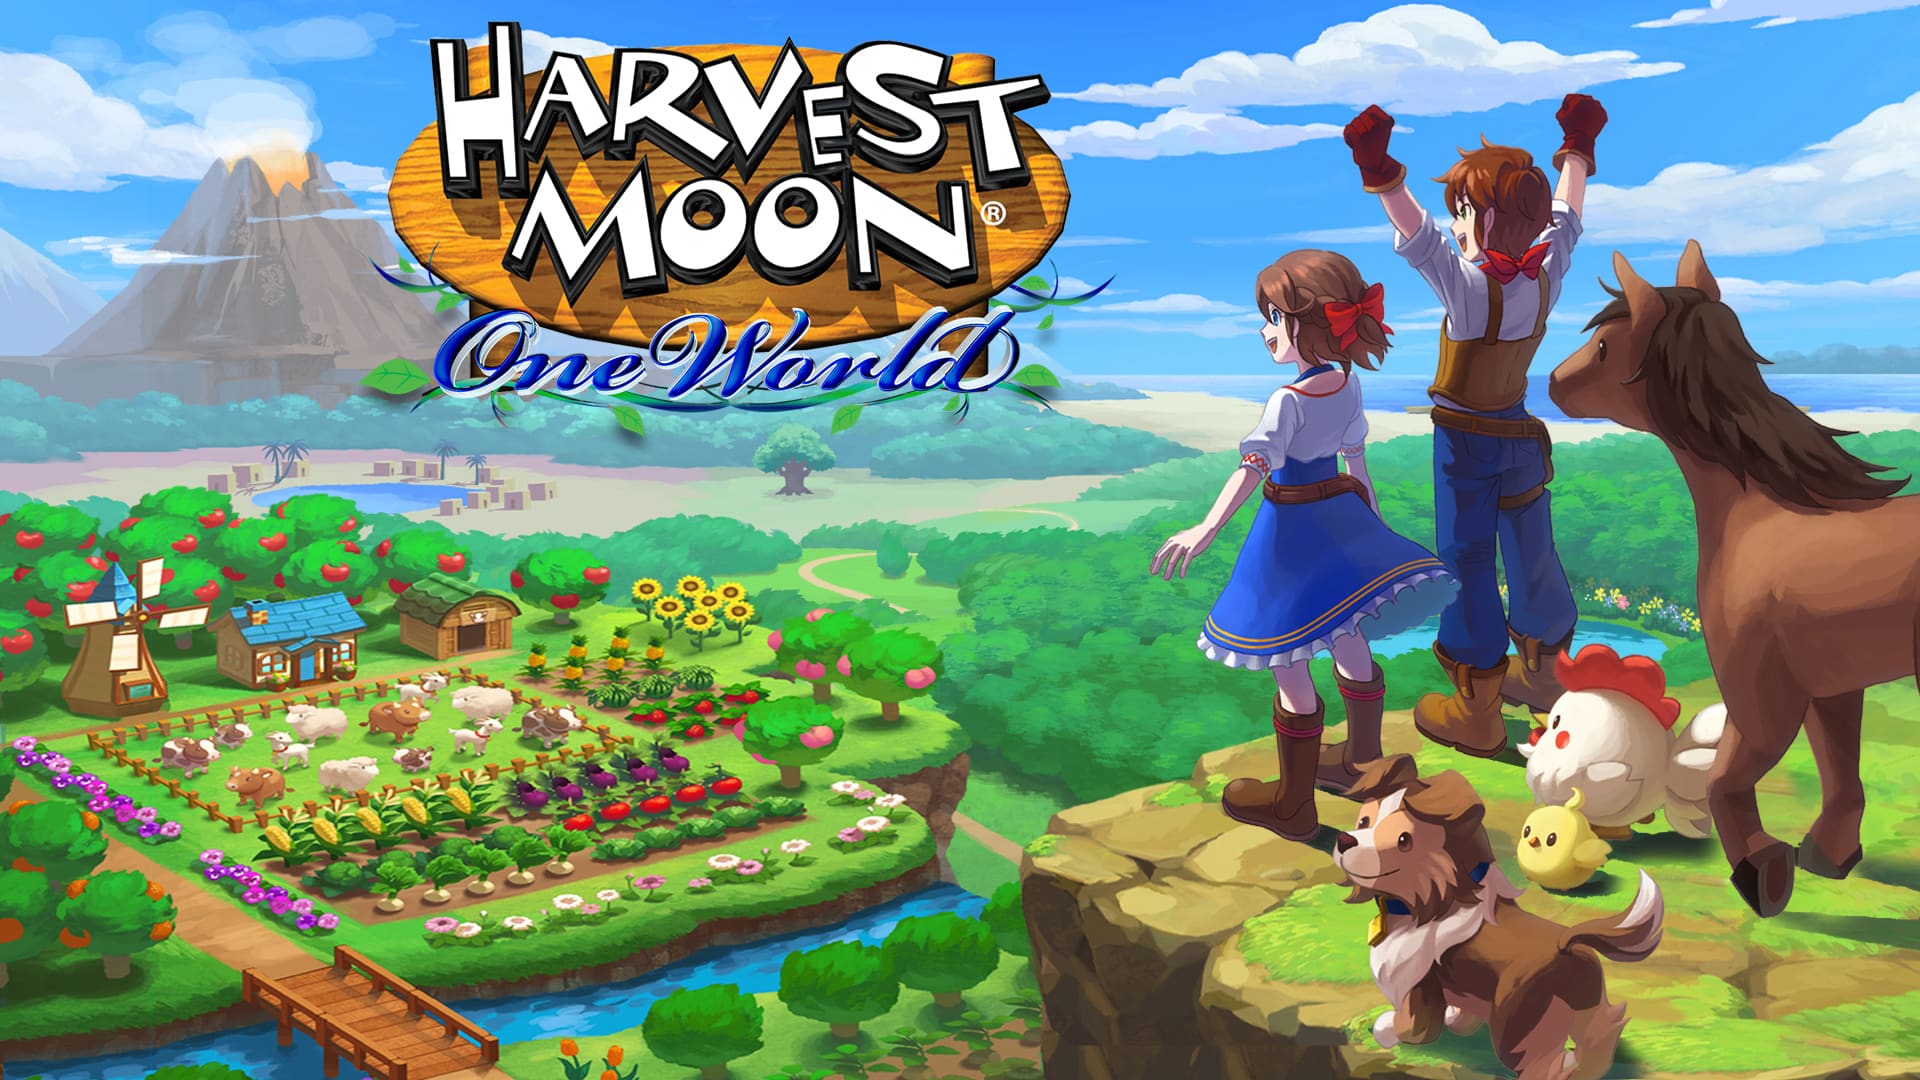 Harvest Moon: One World game release